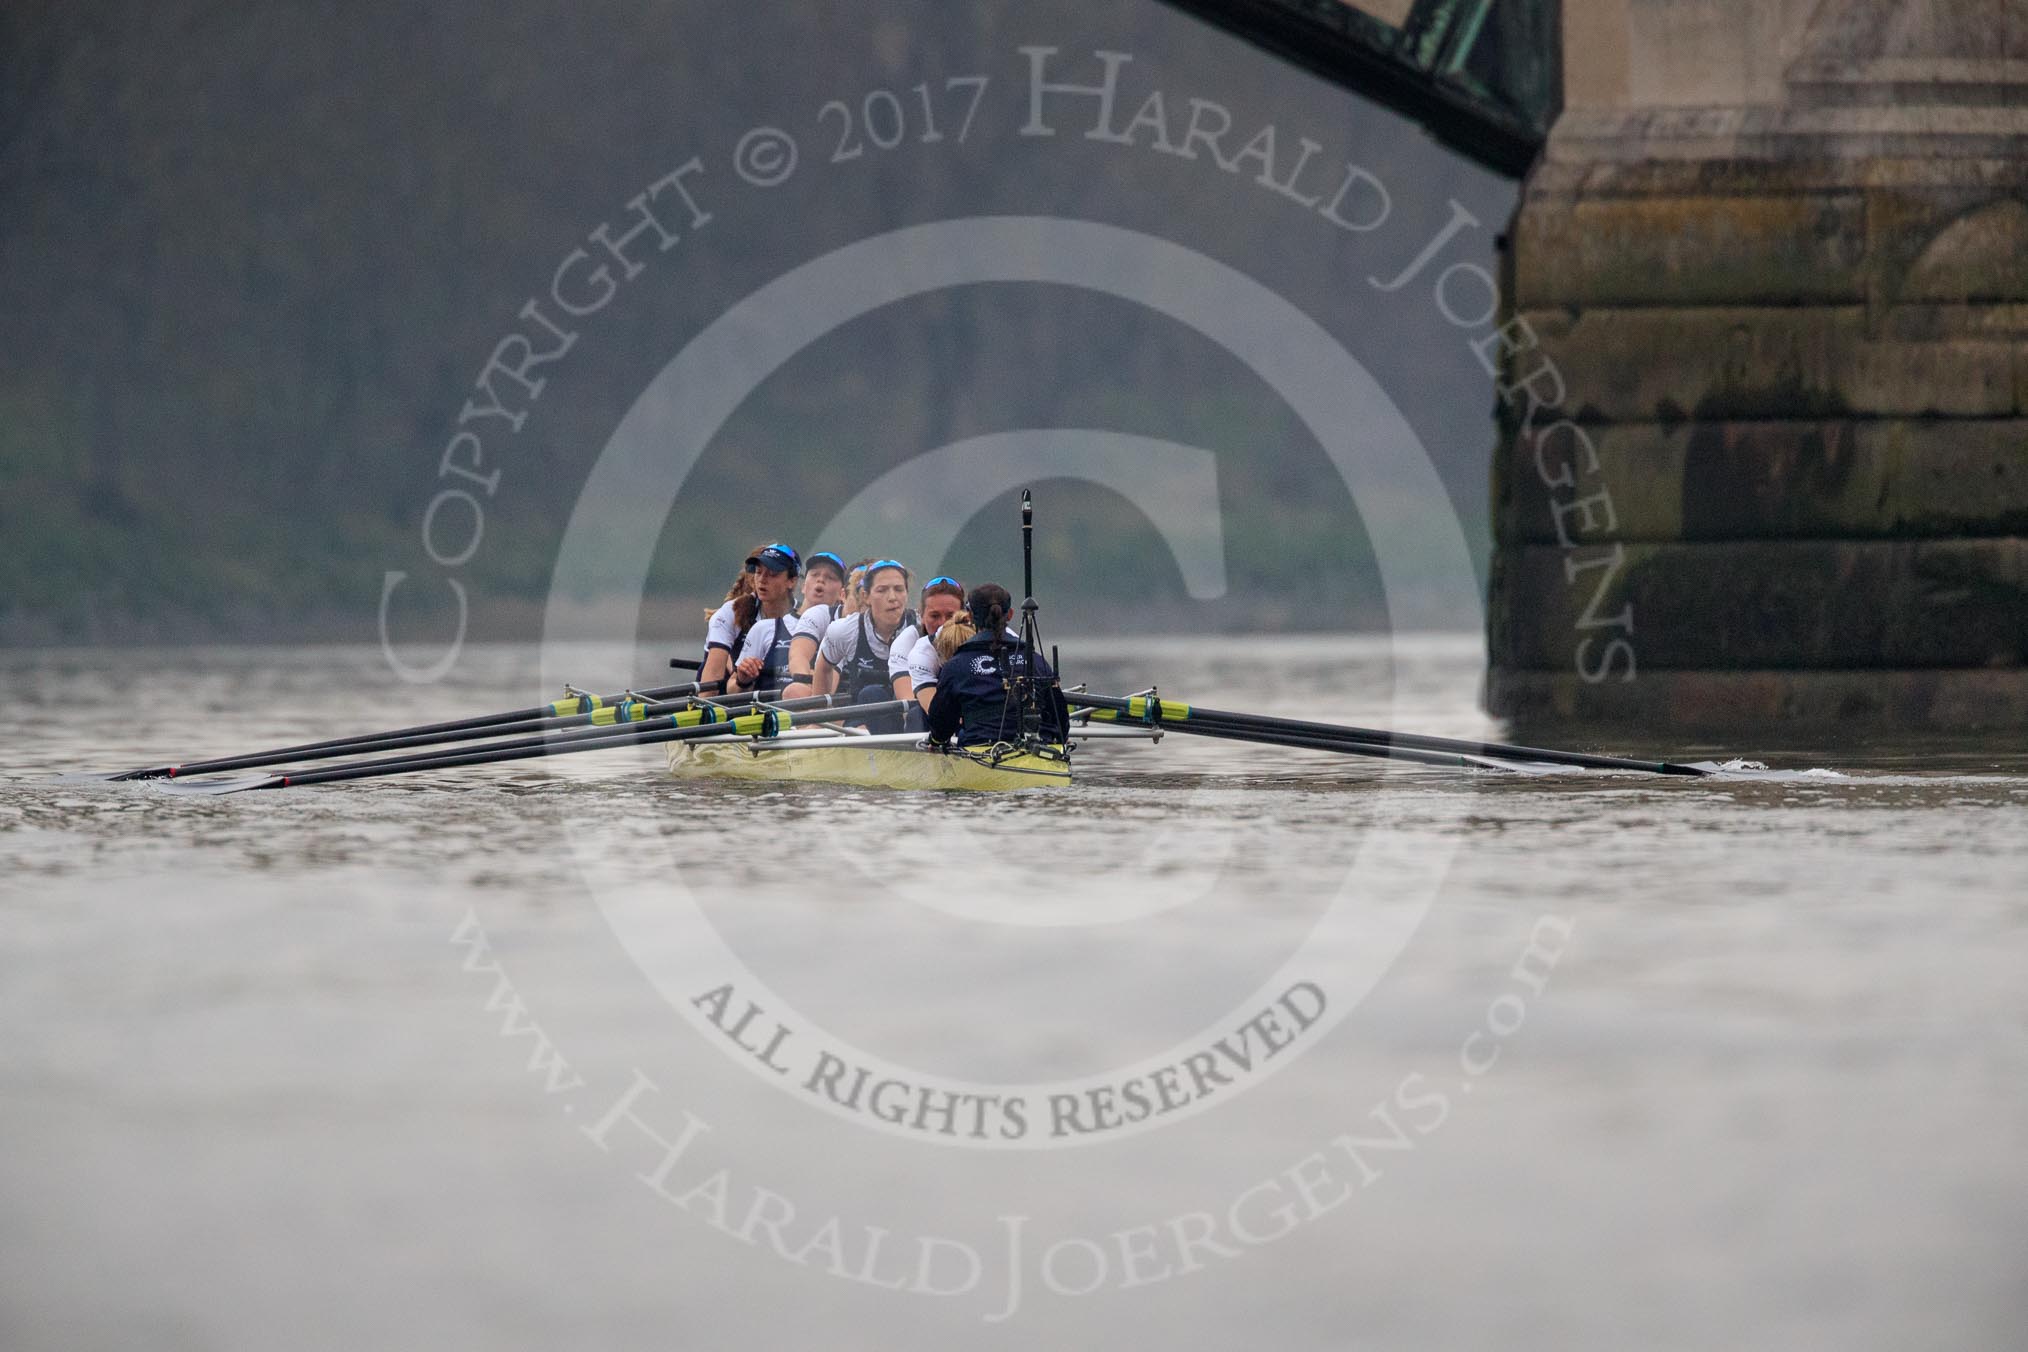 The Cancer Research UK Women's Boat Race 2018: The Oxford women passing the second line as second - bow Renée Koolschijn, 2 Katherine Erickson, 3 Juliette Perry, 4 Alice Roberts, 5 Morgan McGovern, 6 Sara Kushma, 7 Abigail Killen, stroke Beth Bridgman, cox Jessica Buck.
River Thames between Putney Bridge and Mortlake,
London SW15,

United Kingdom,
on 24 March 2018 at 16:50, image #219